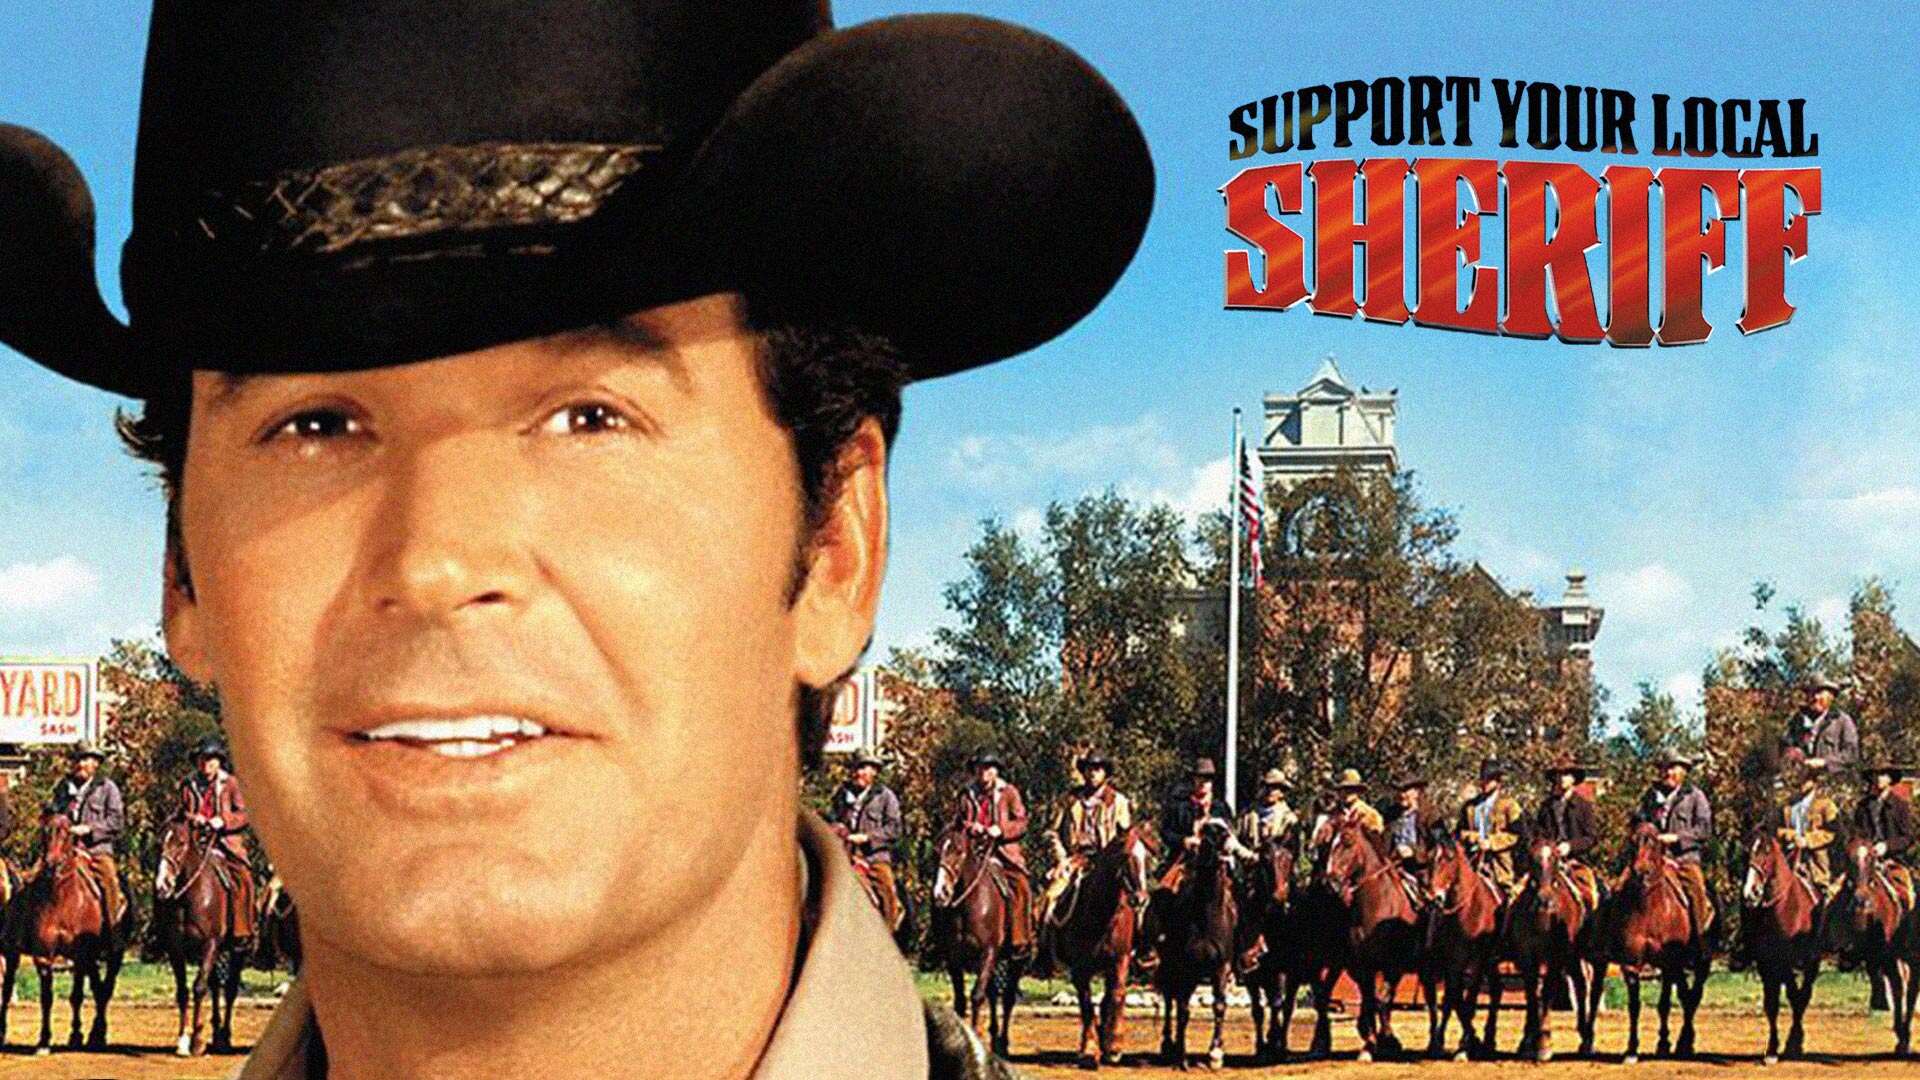 43-facts-about-the-movie-support-your-local-sheriff